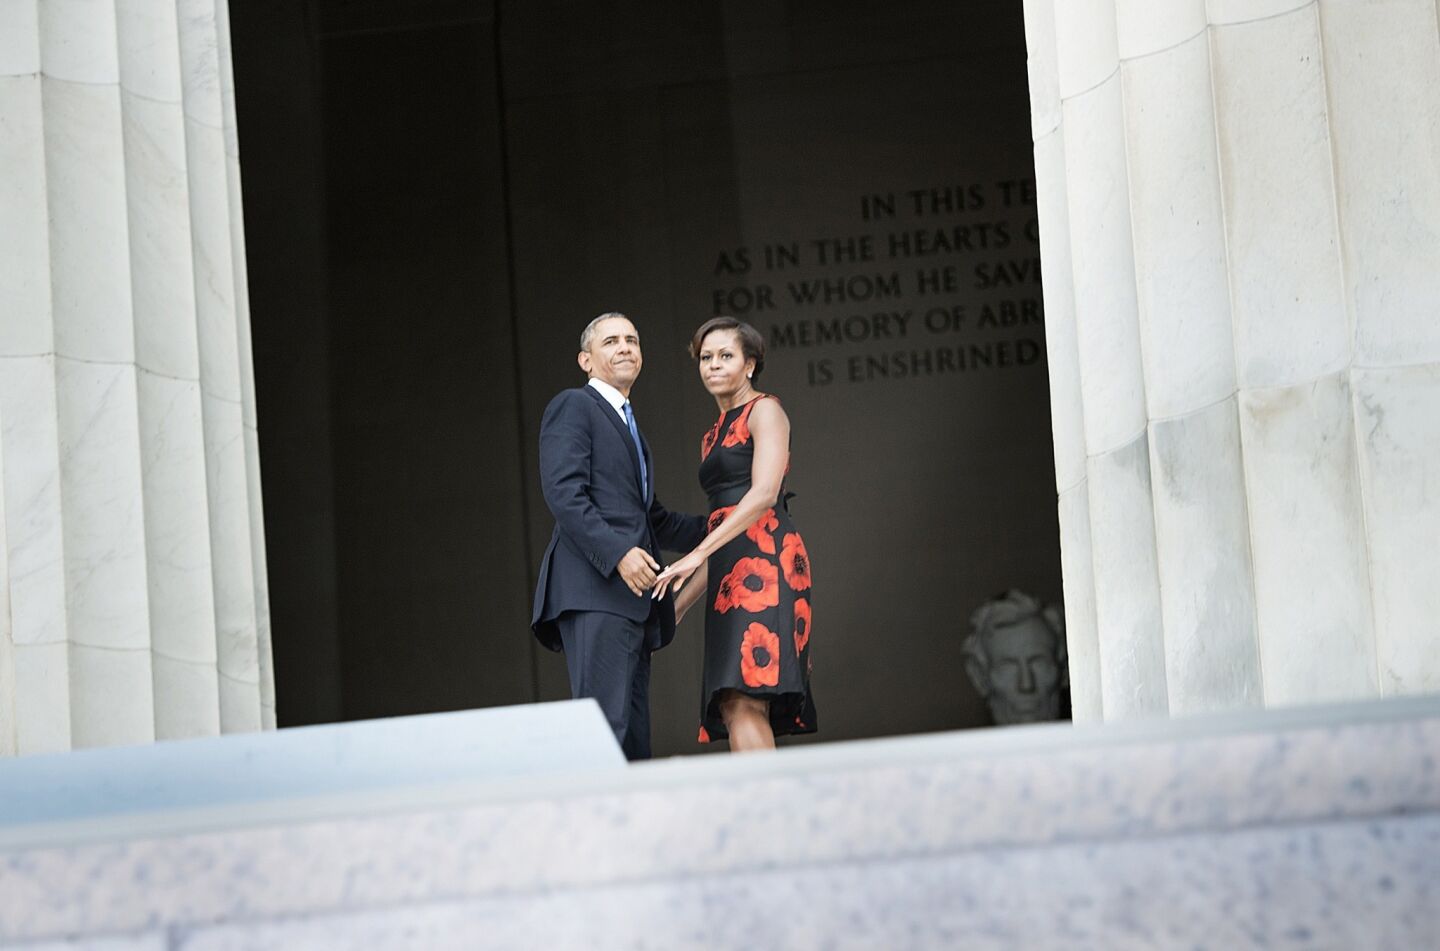 President Obama and first lady Michelle Obama walk into the Lincoln Memorial after speaking during the March on Washington commemoration.